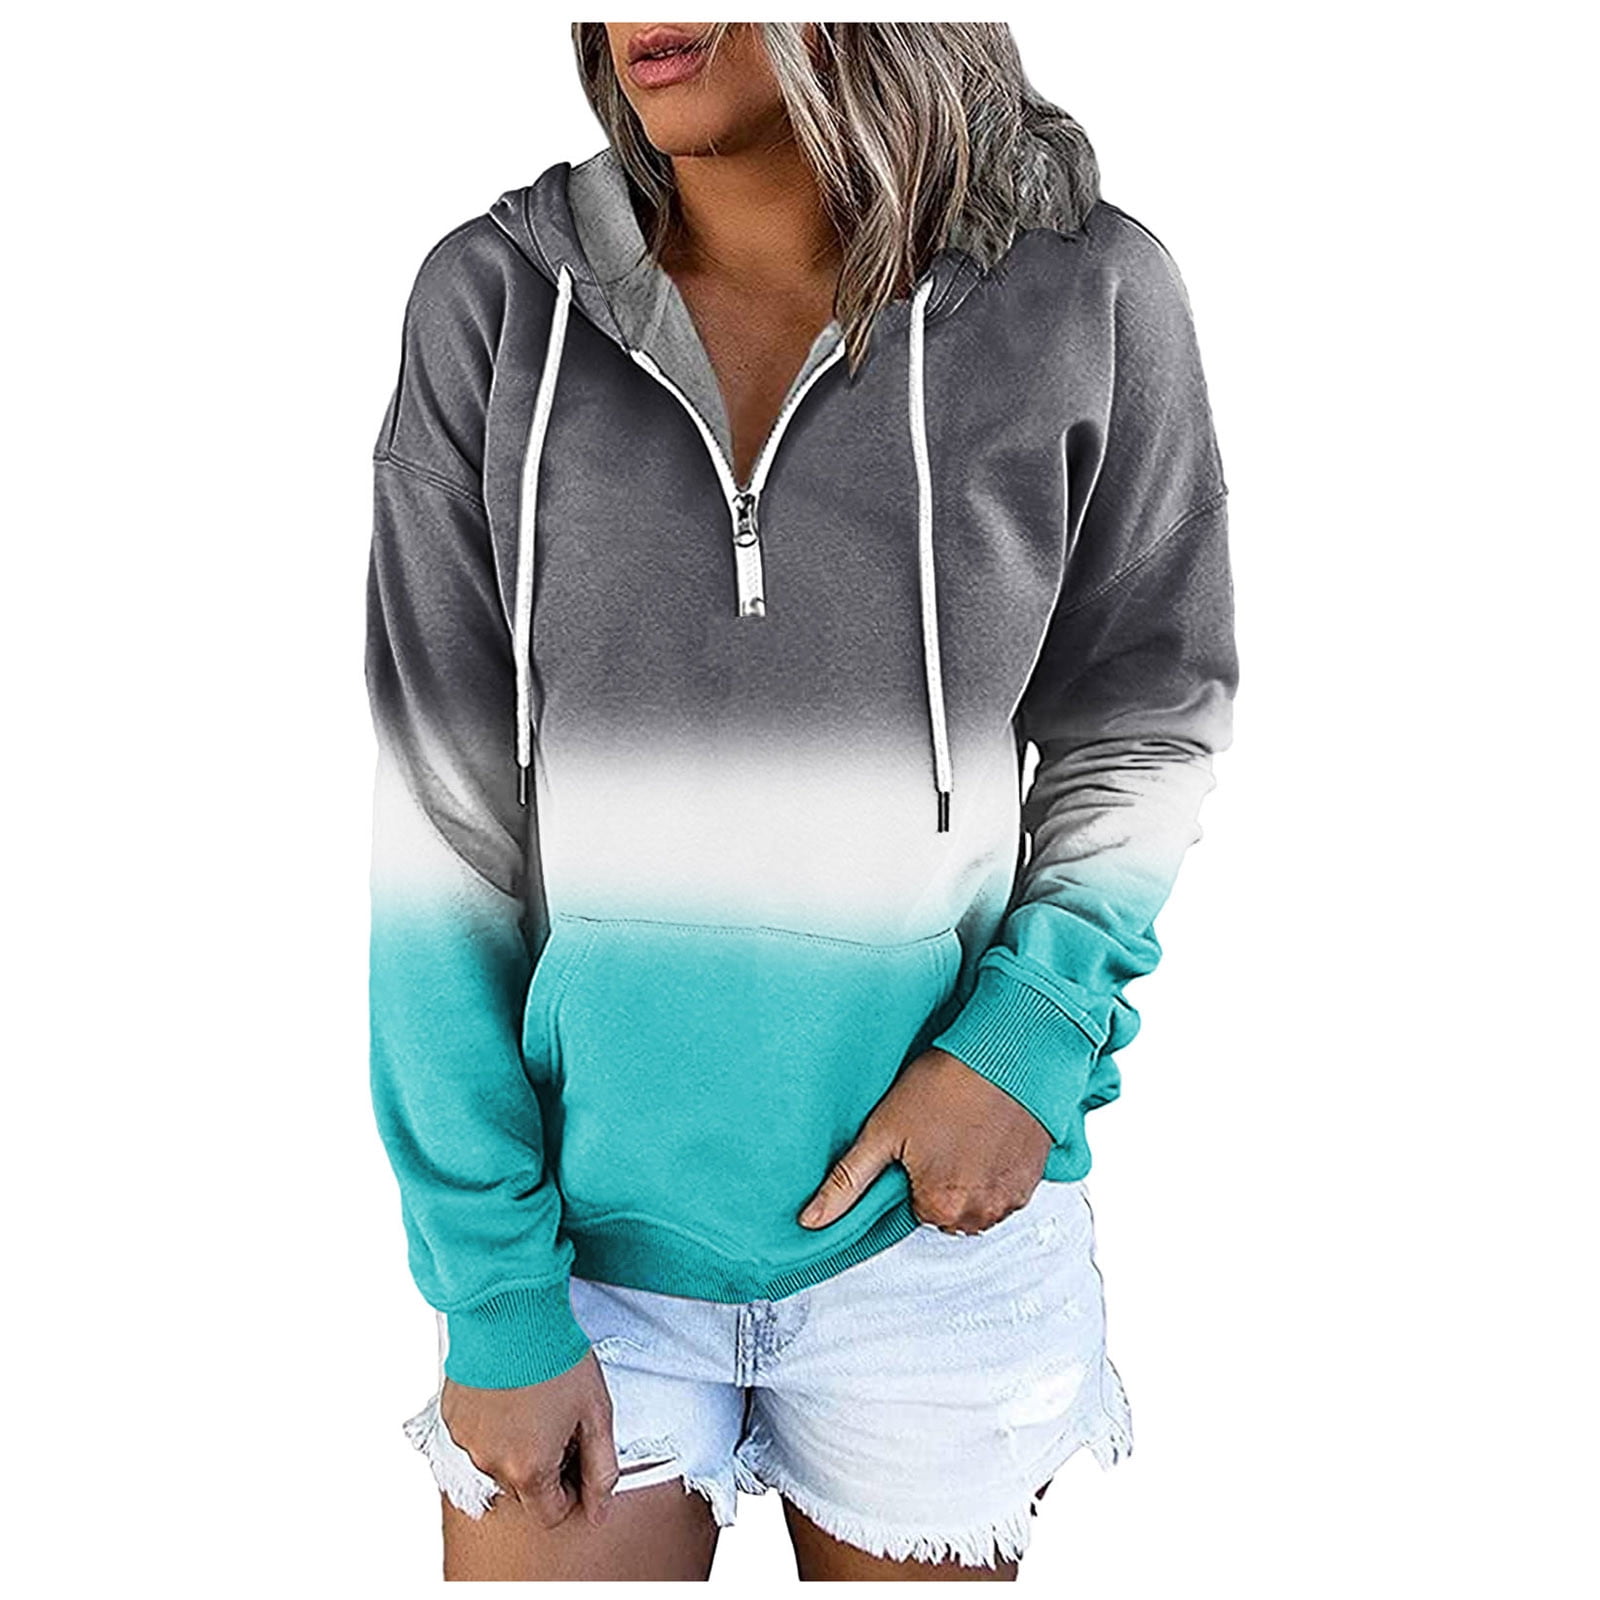 This is What Autism Looks Like Hoodie Ladies Casual Zip-up Sweatshirts Jackets Coats Hooded Blouse Pullover with Front Pocket 